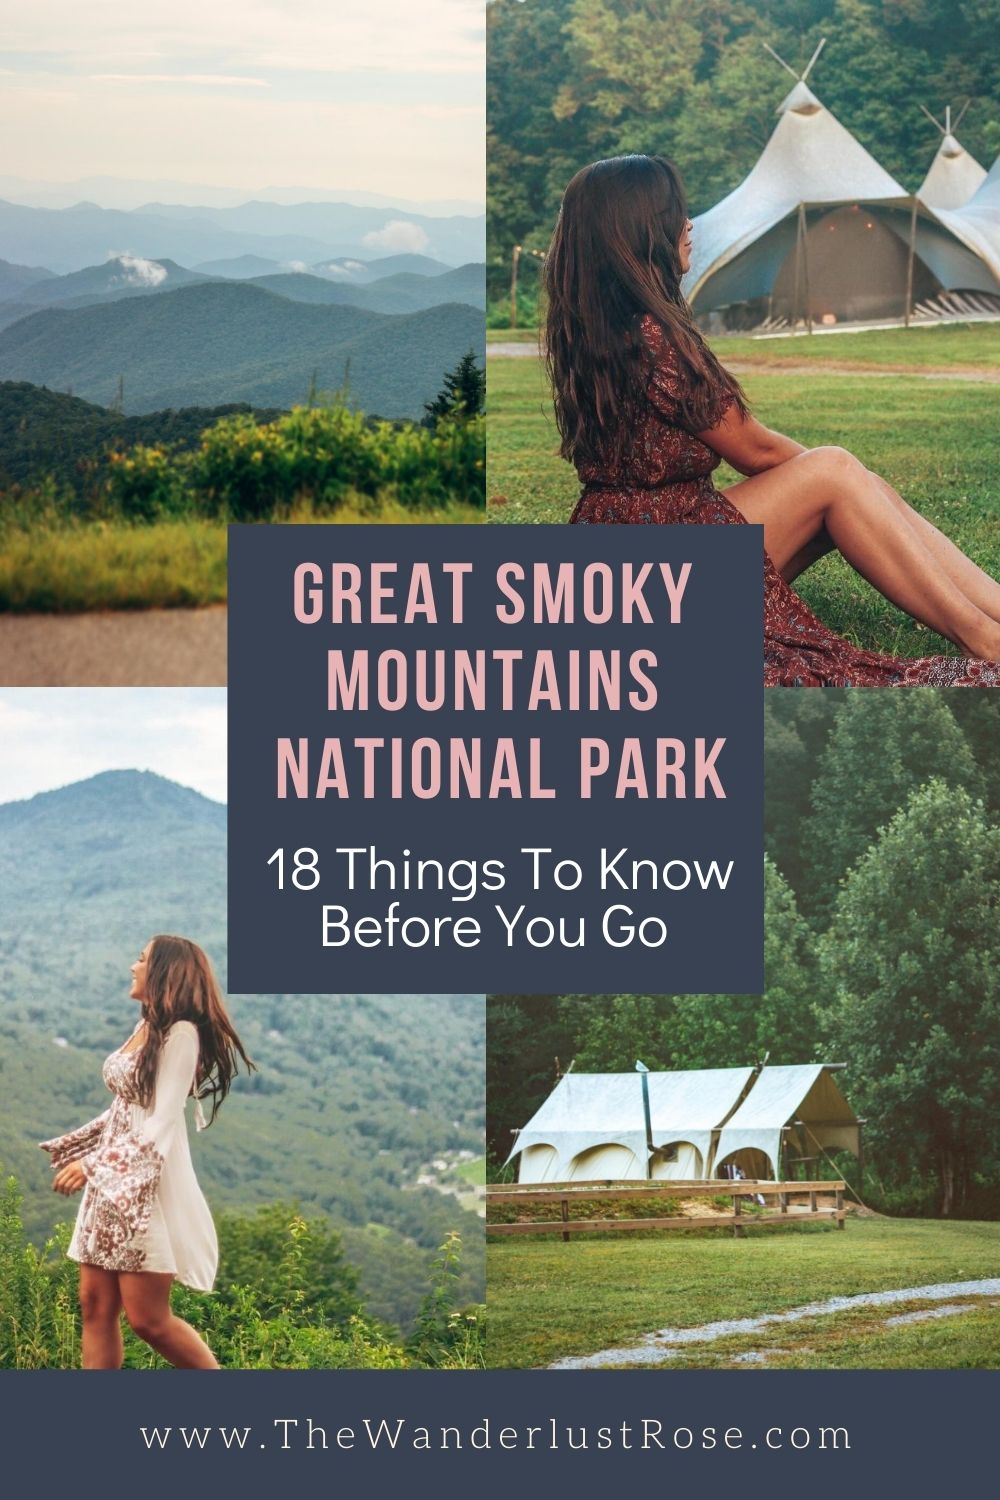 4 Local Stores Where You Can Gear Up for Camping in the Smoky